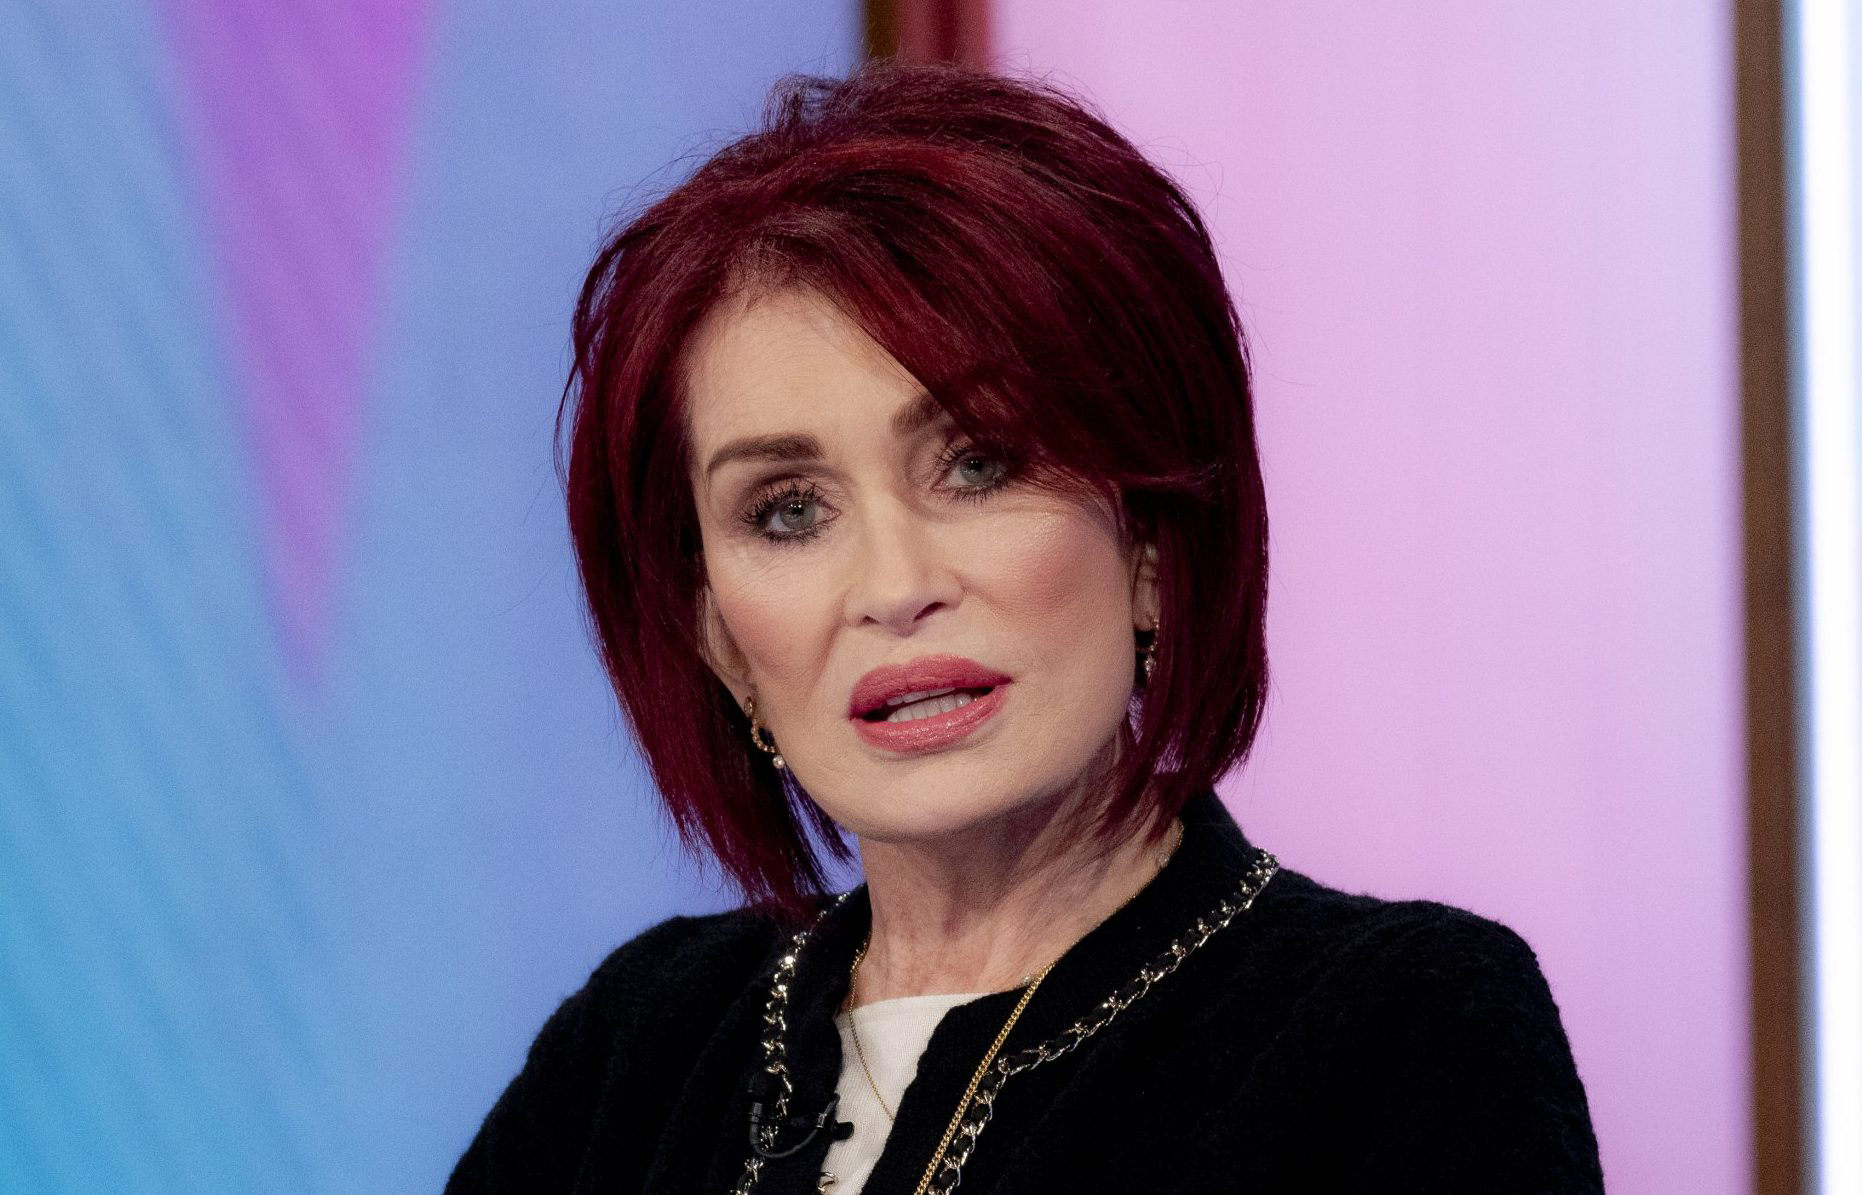 Sharon Osbourne’s team responds to claims she’s earning £100,000 a day